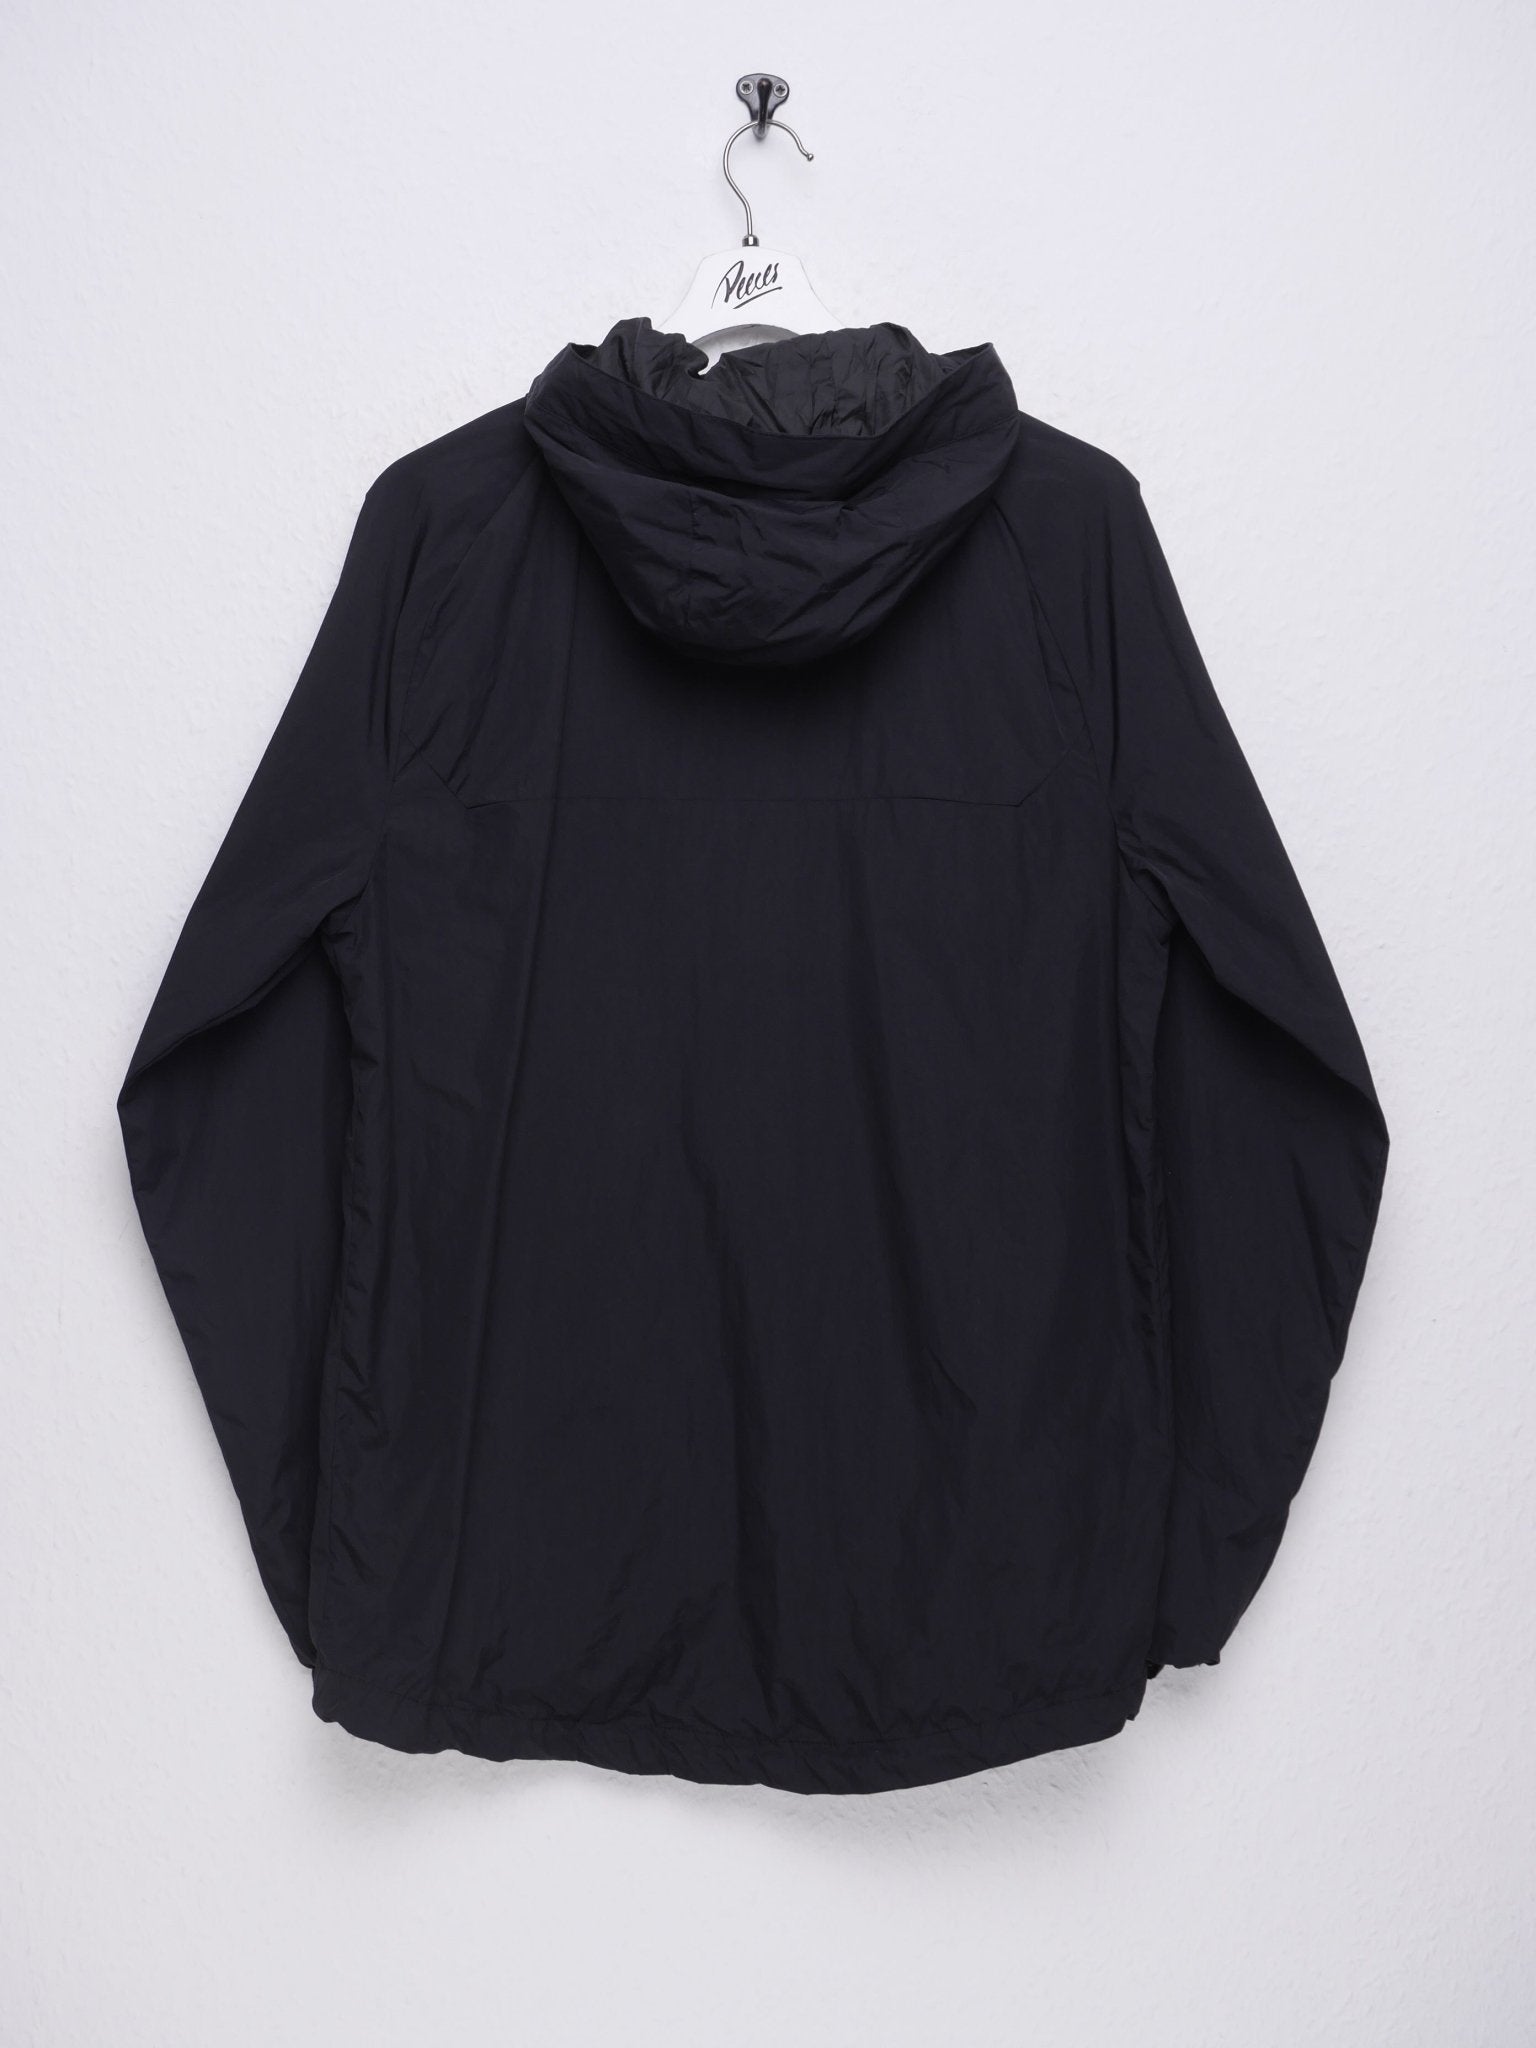 Champion 3-in-1 Systems black Jacke - Peeces